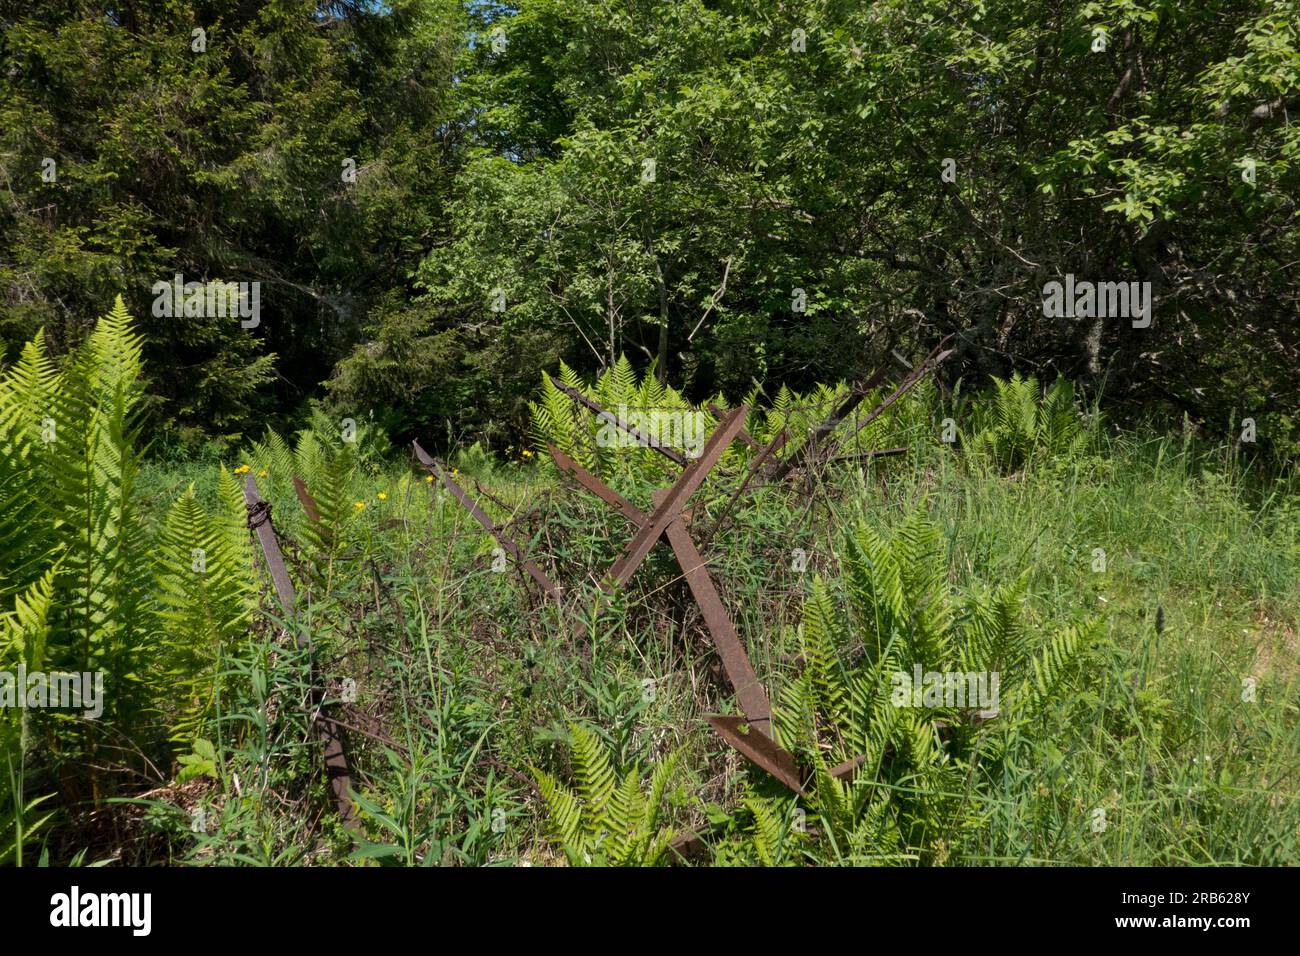 Remains of the first world war: an overgrown rusted barbed wire fence Stock Photo